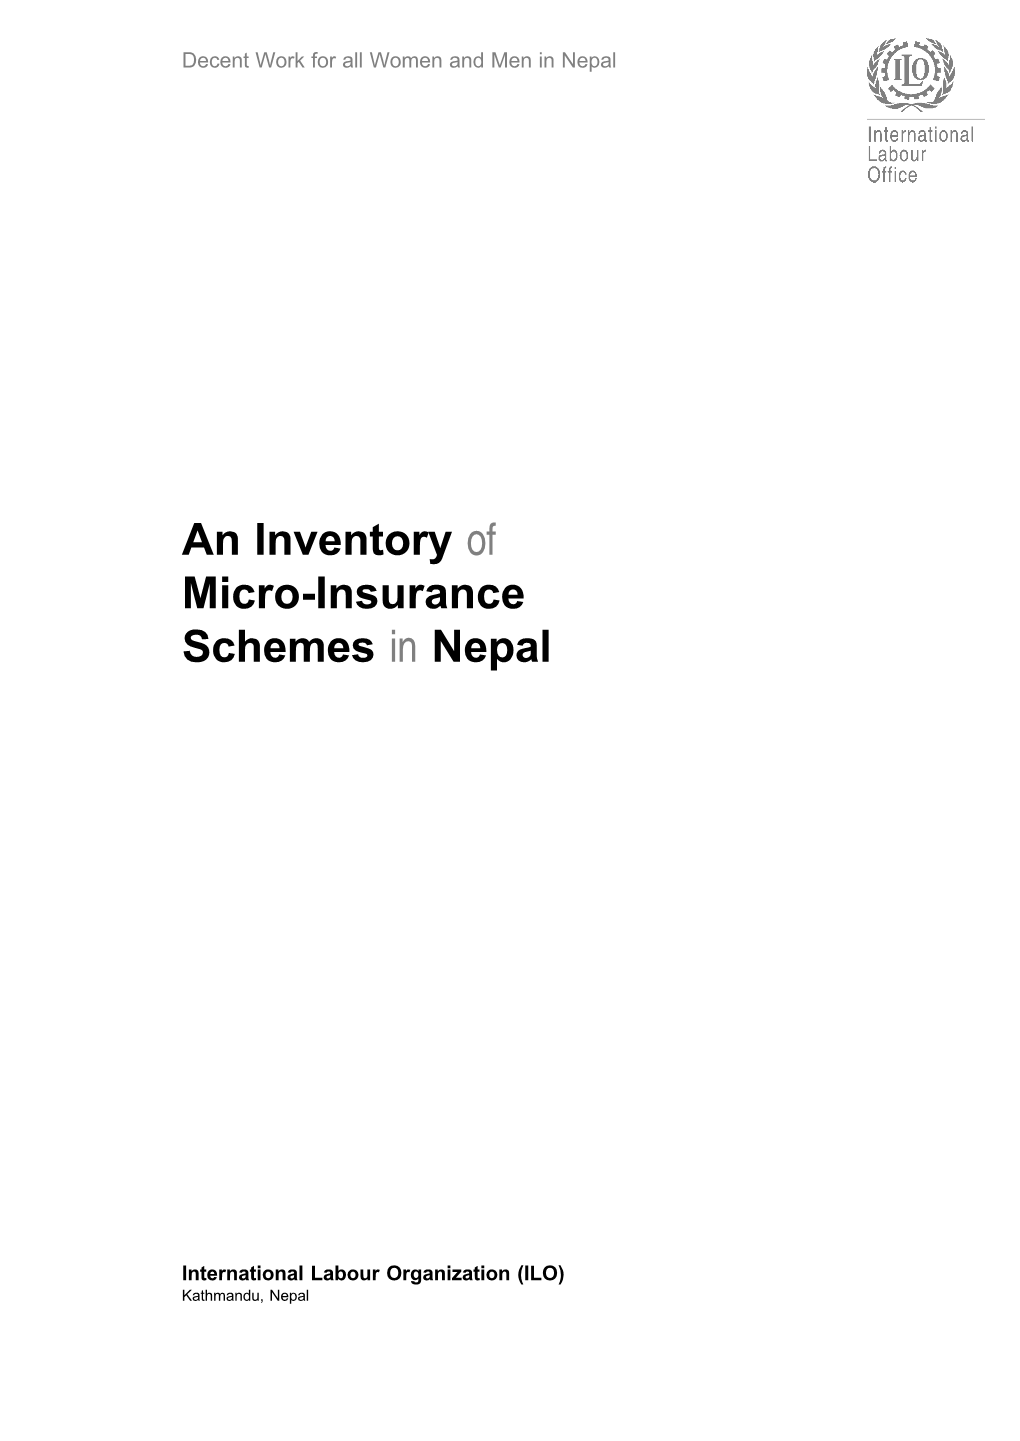 An Inventory of Micro-Insurance Schemes in Nepal